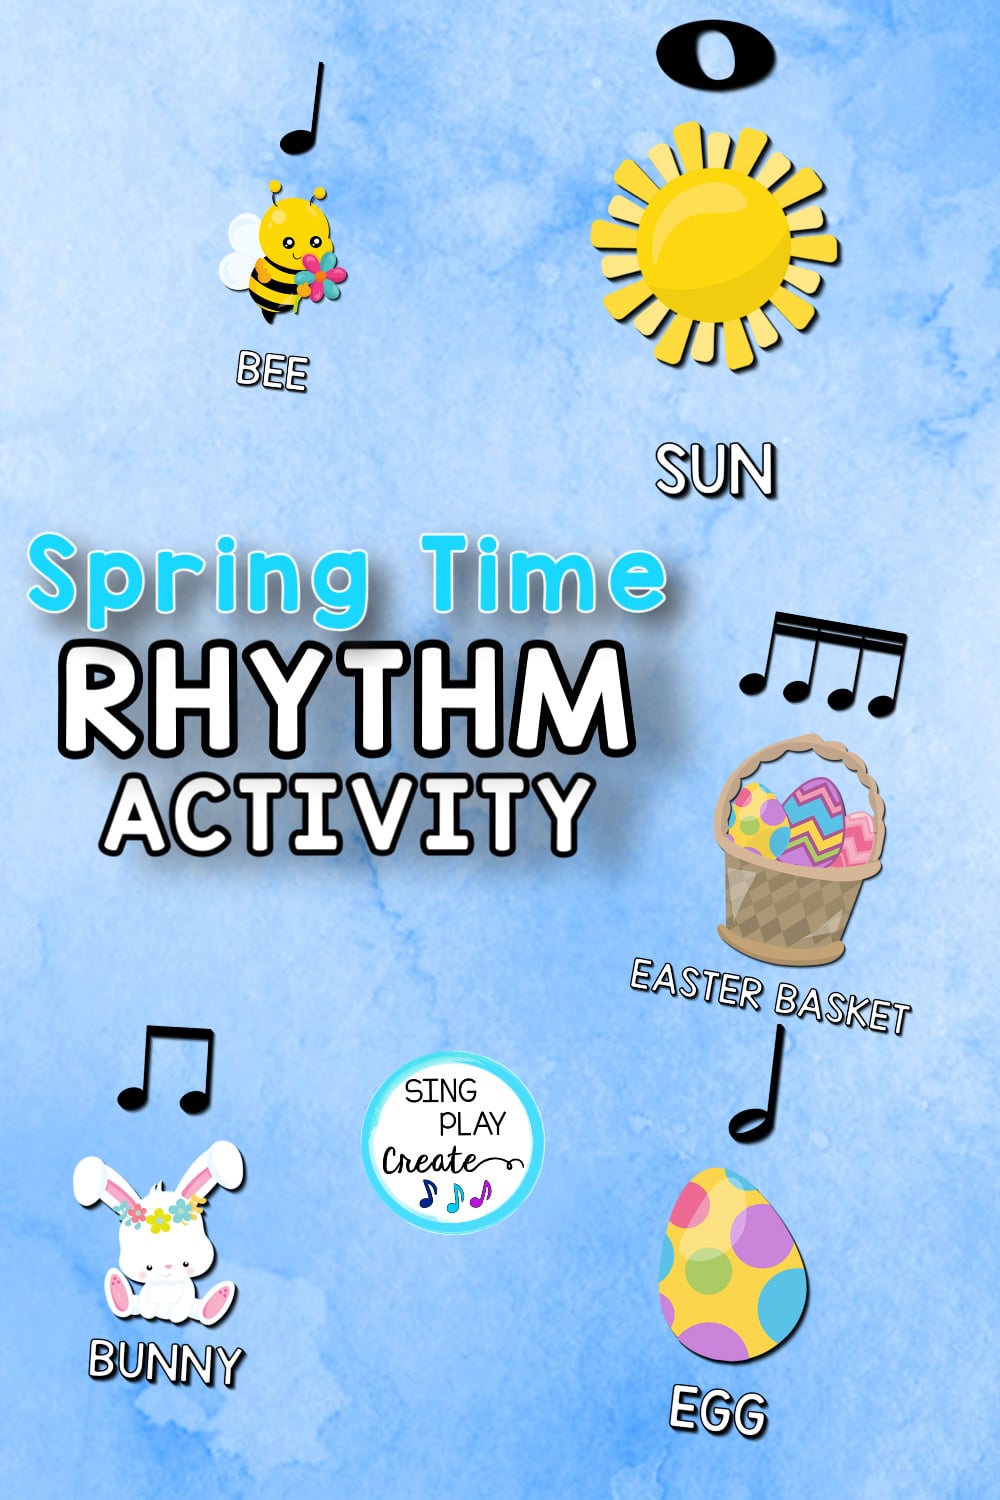 Spring themed elementary music rhythm activities for practicing rhythms and note values. Rhythm Play along activities are i fun!